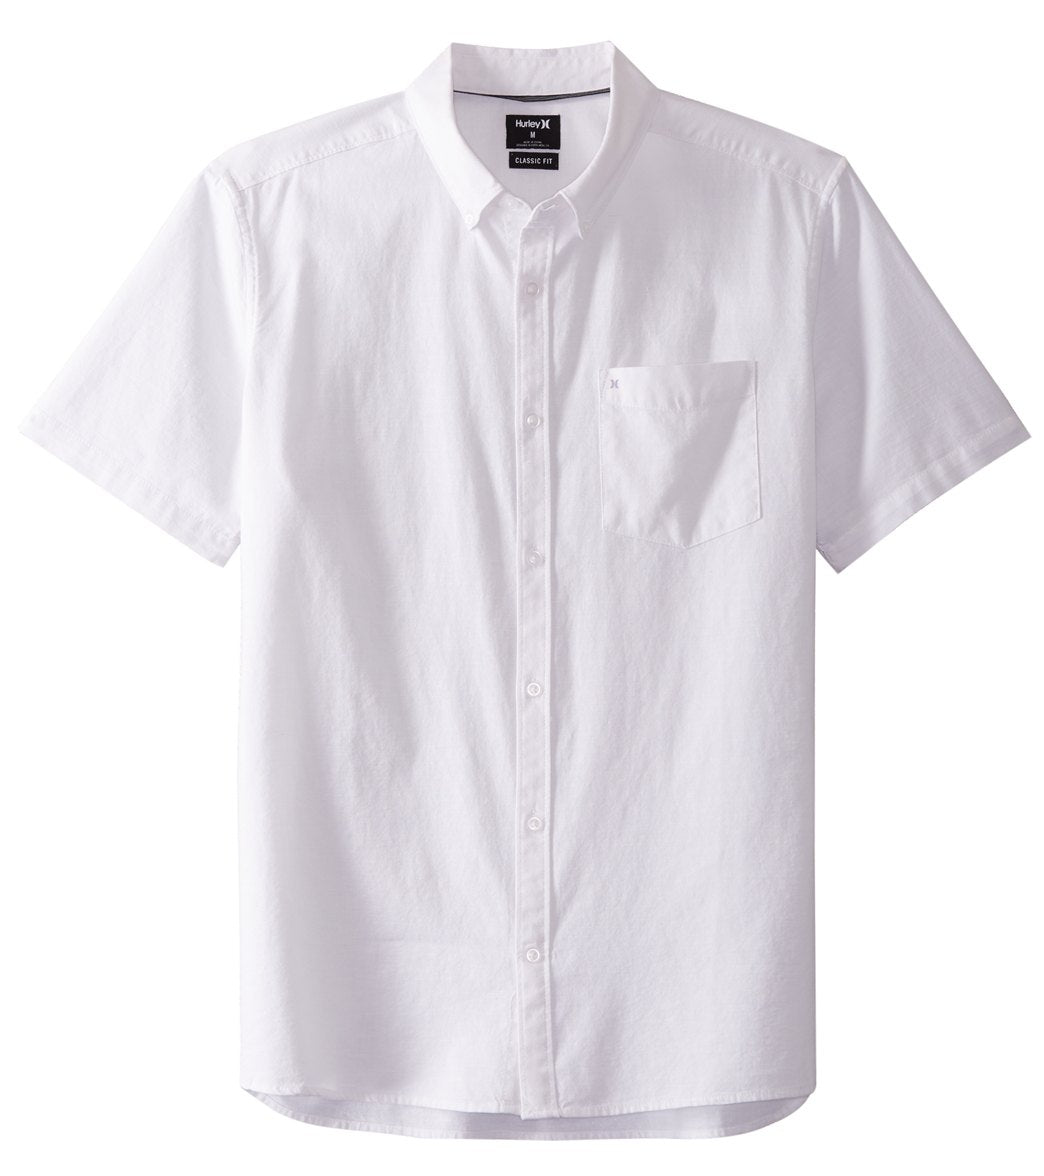 Hurley Men's One & Only 2.0 Short Sleeve Woven Shirt - White Xl Cotton - Swimoutlet.com